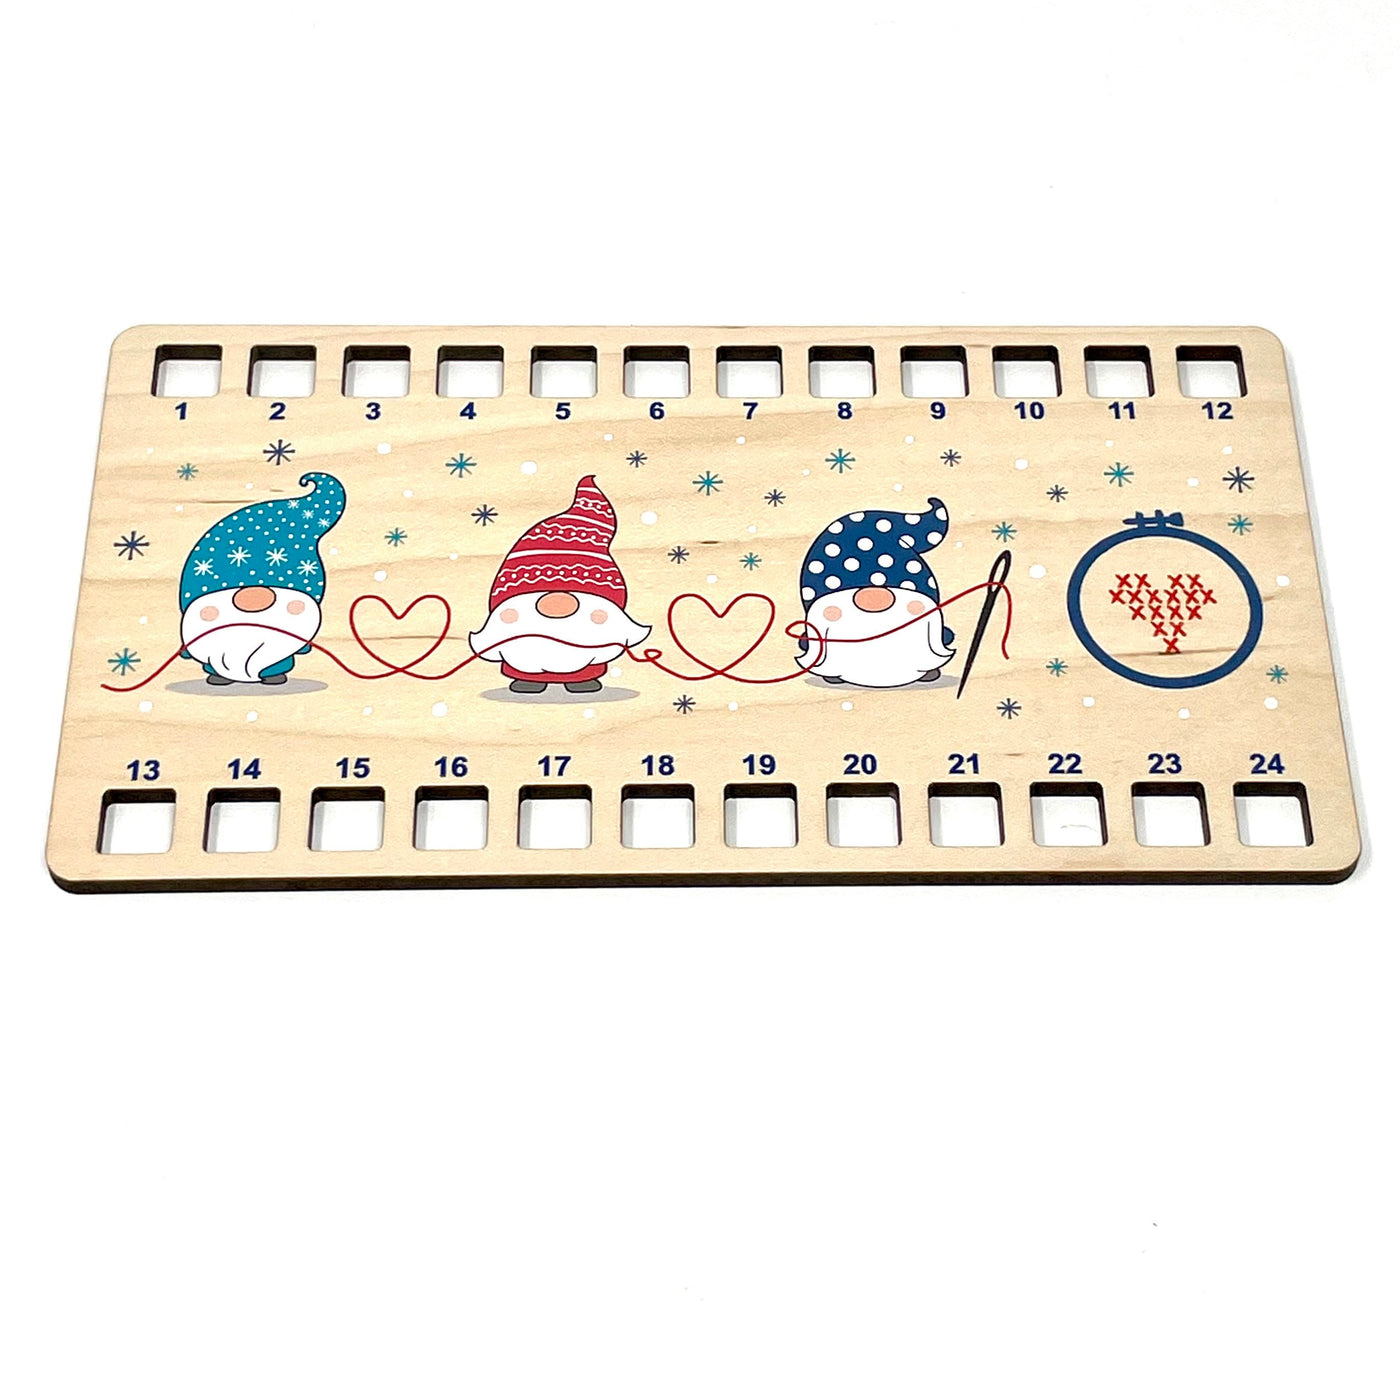 Winter Gnome thread / floss holder organiser for cross stitch and embroidery